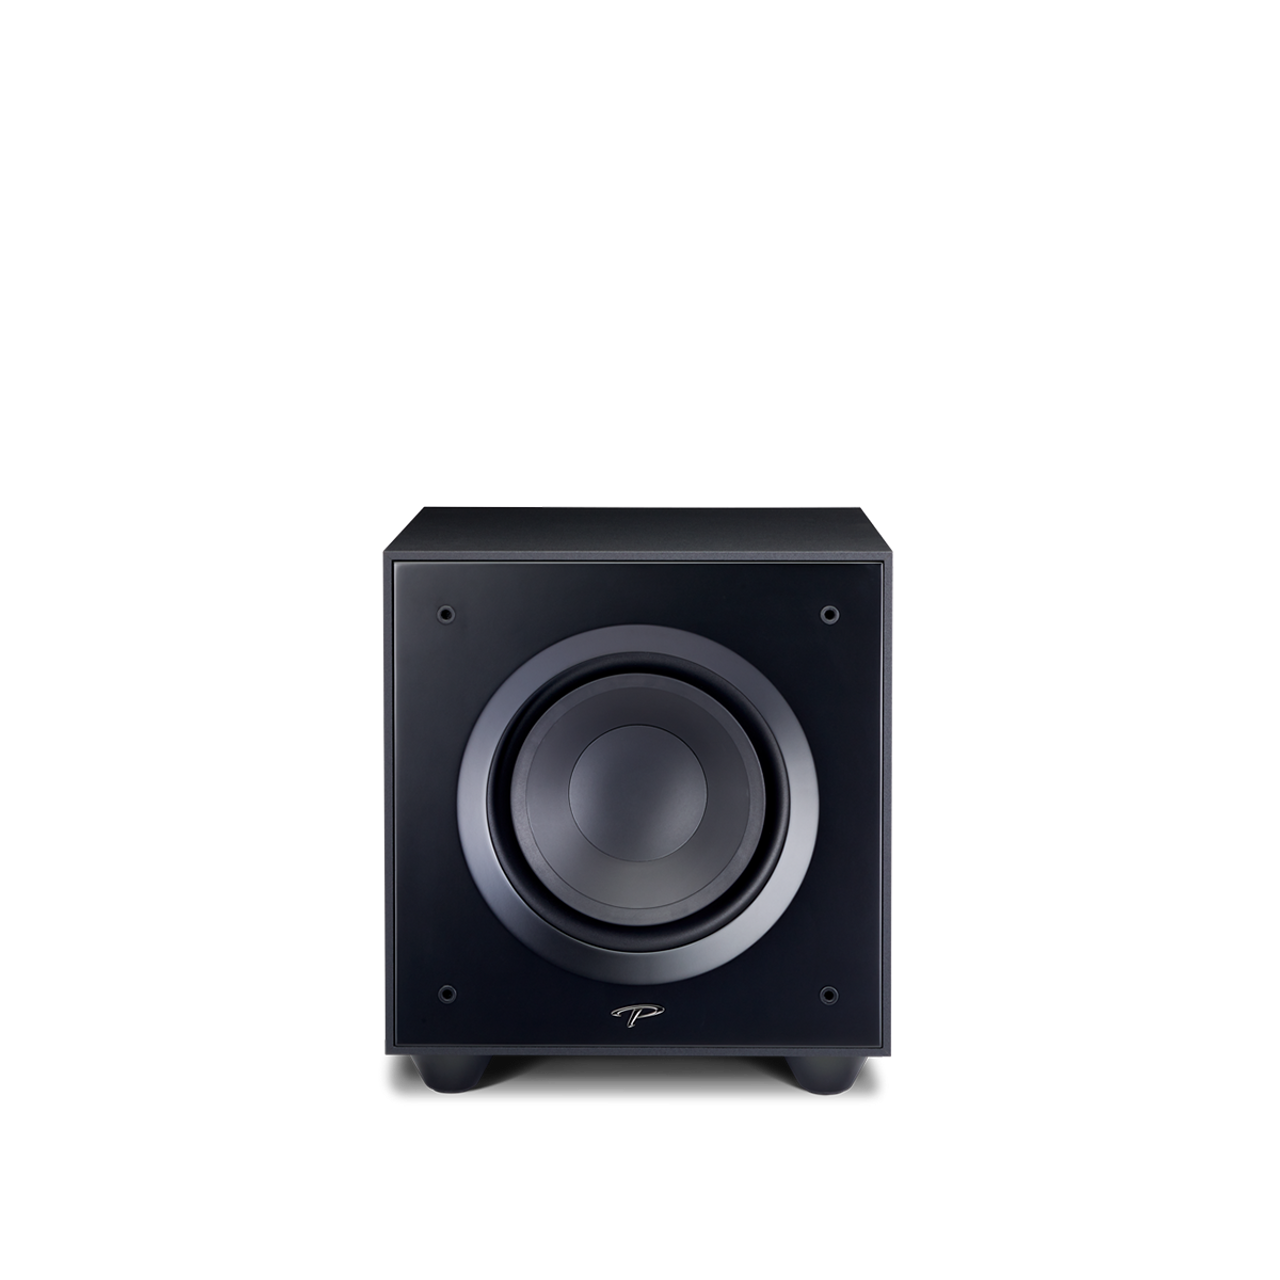 Paradigm Defiance V10 10" 120W RMS Powered Subwoofer